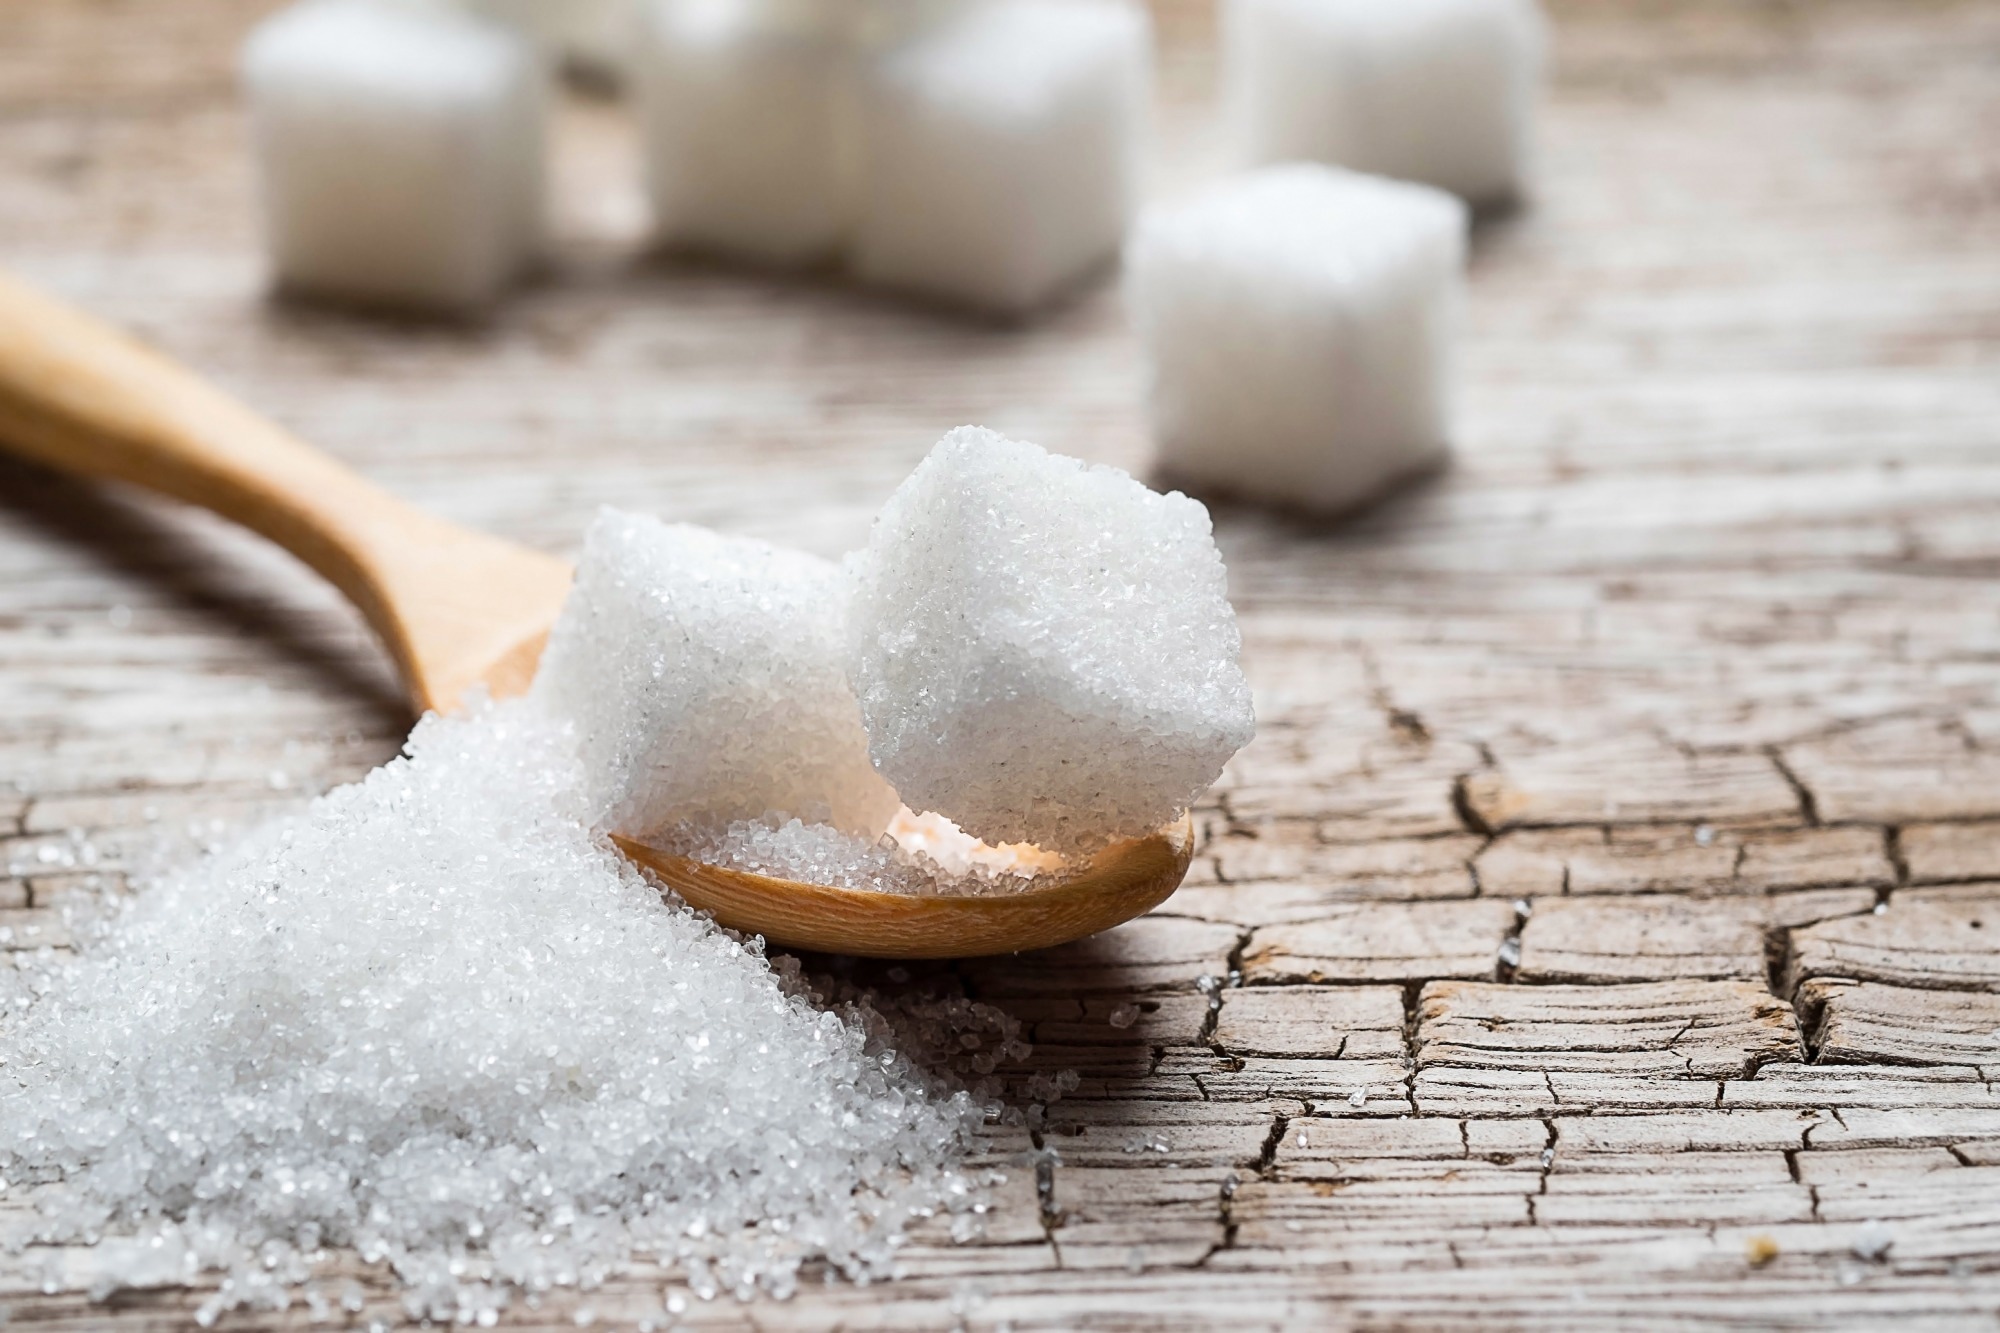 Study: The Impact of Free Sugar on Human Health—A Narrative Review. Image Credit: qoppi/Shutterstock.com